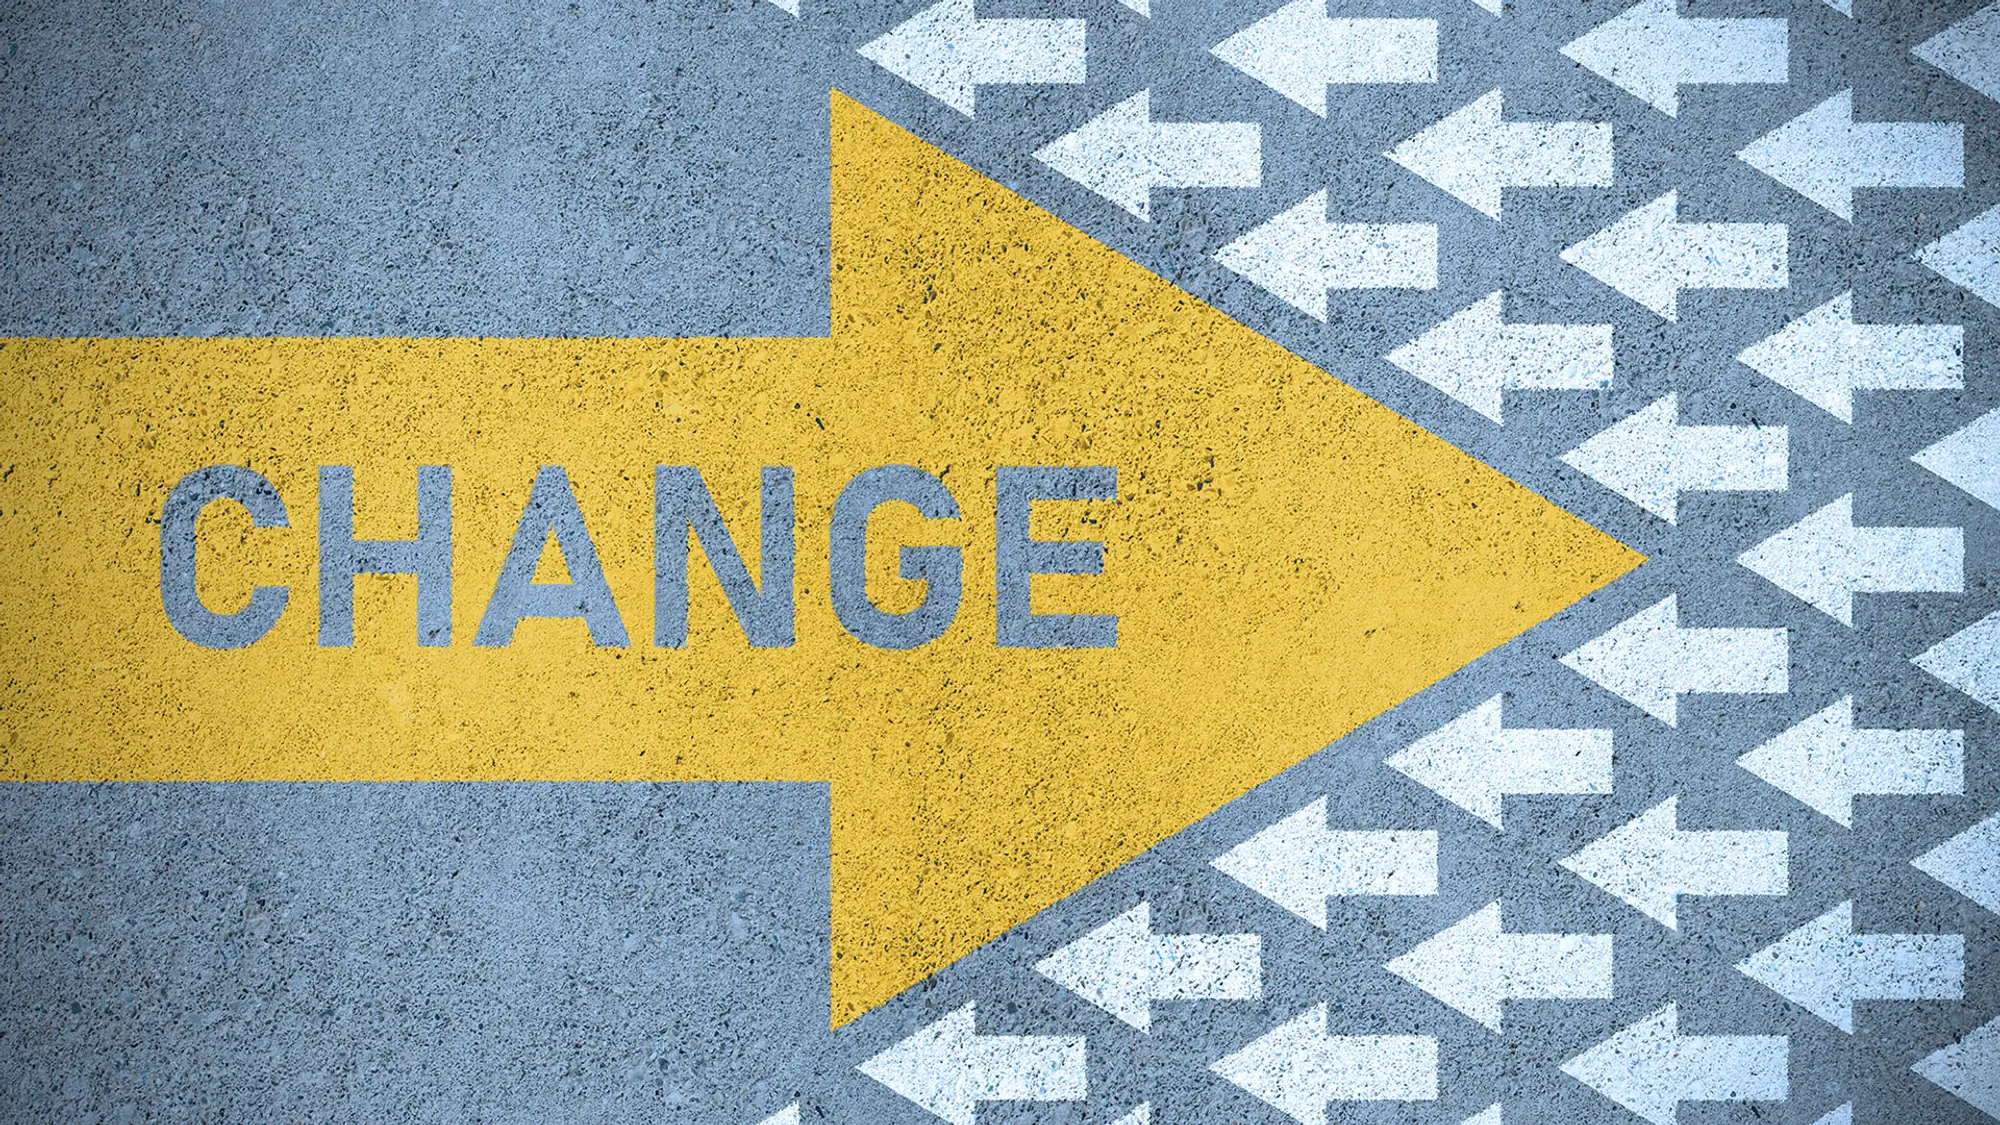 A large yellow arrow with the word ‘change’ pushing against smaller white arrows pushing back